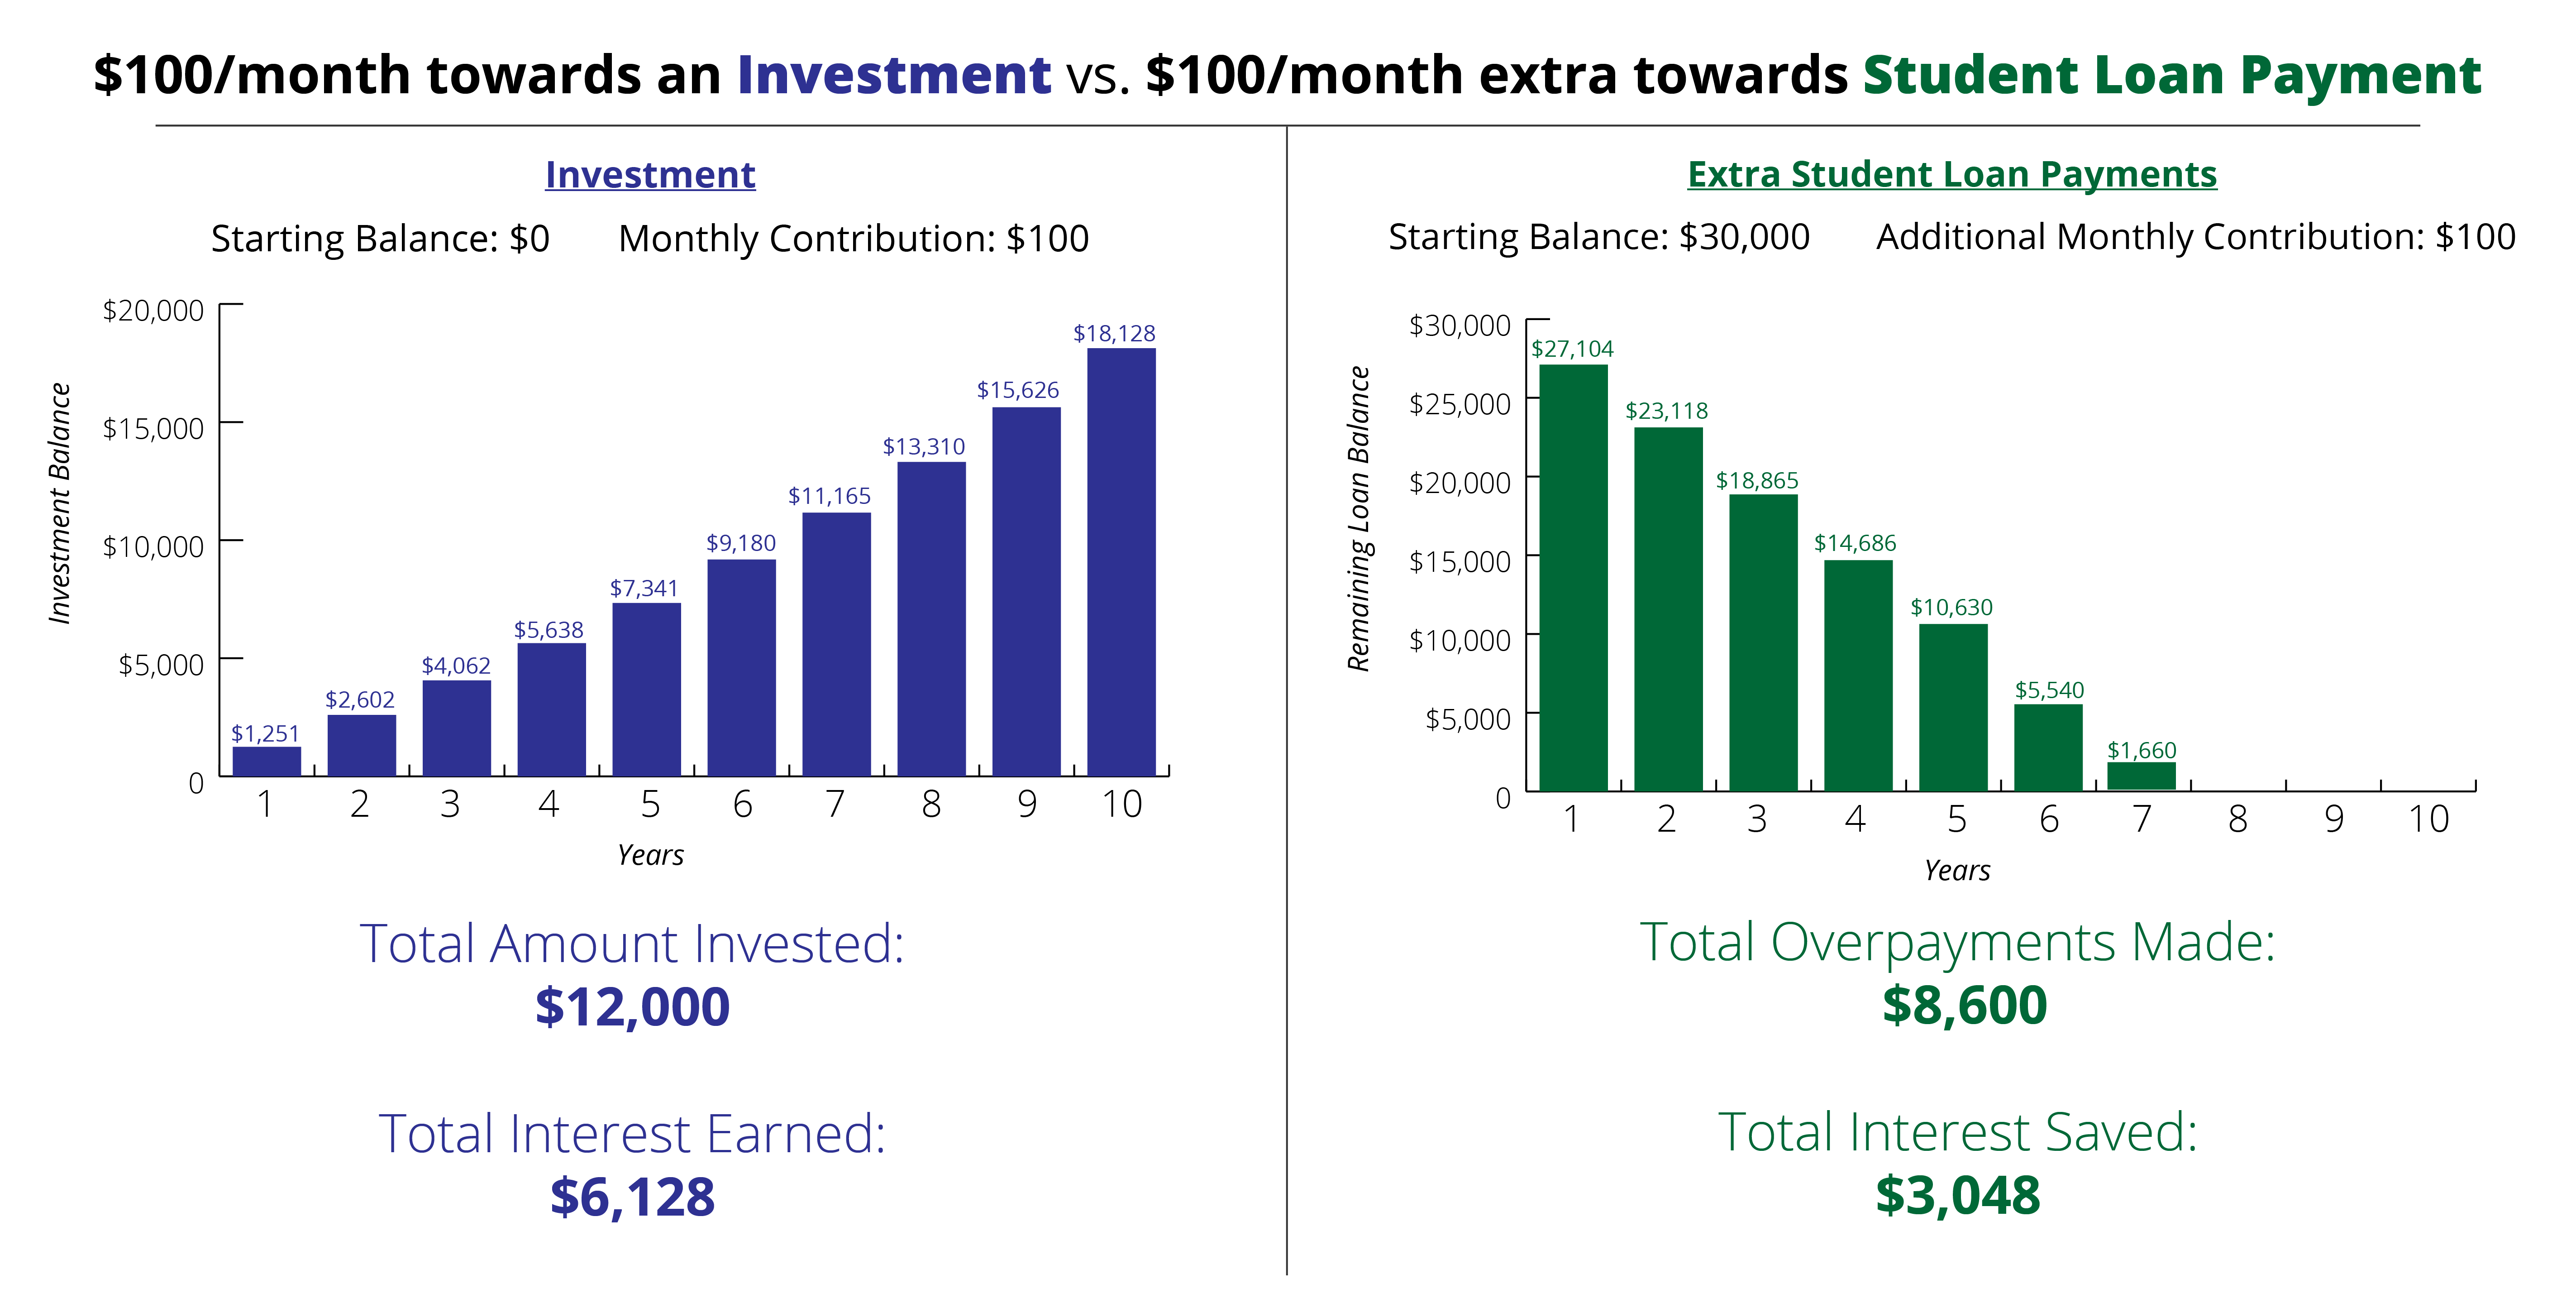 $100/month towards an Investment vs. $100/month extra towards Student Loan Payment